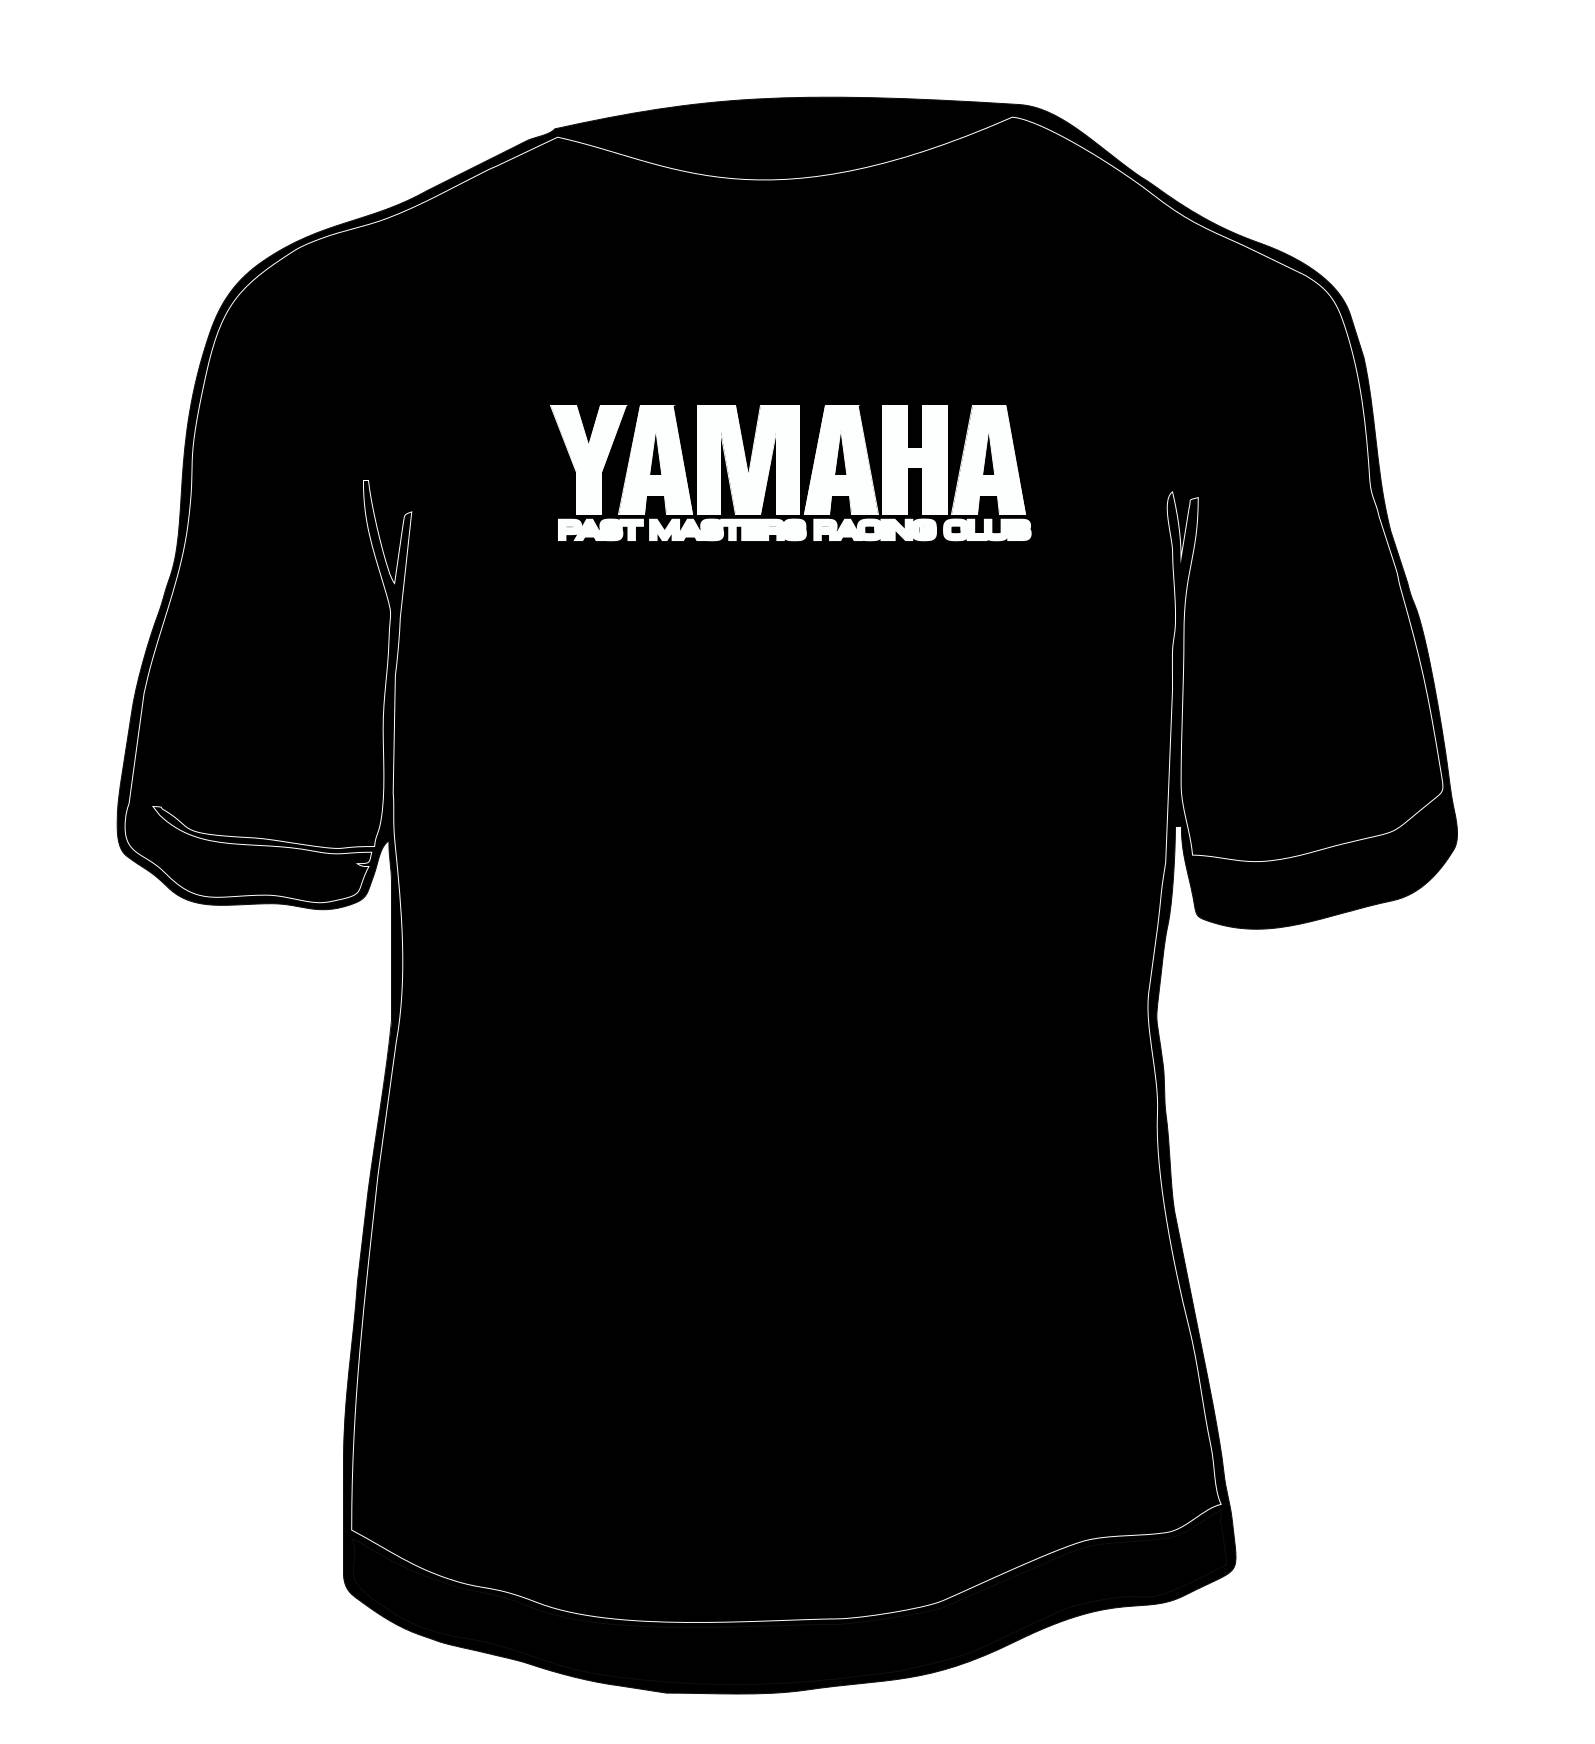 Link to view the entire product category The YPM Clothing Collection